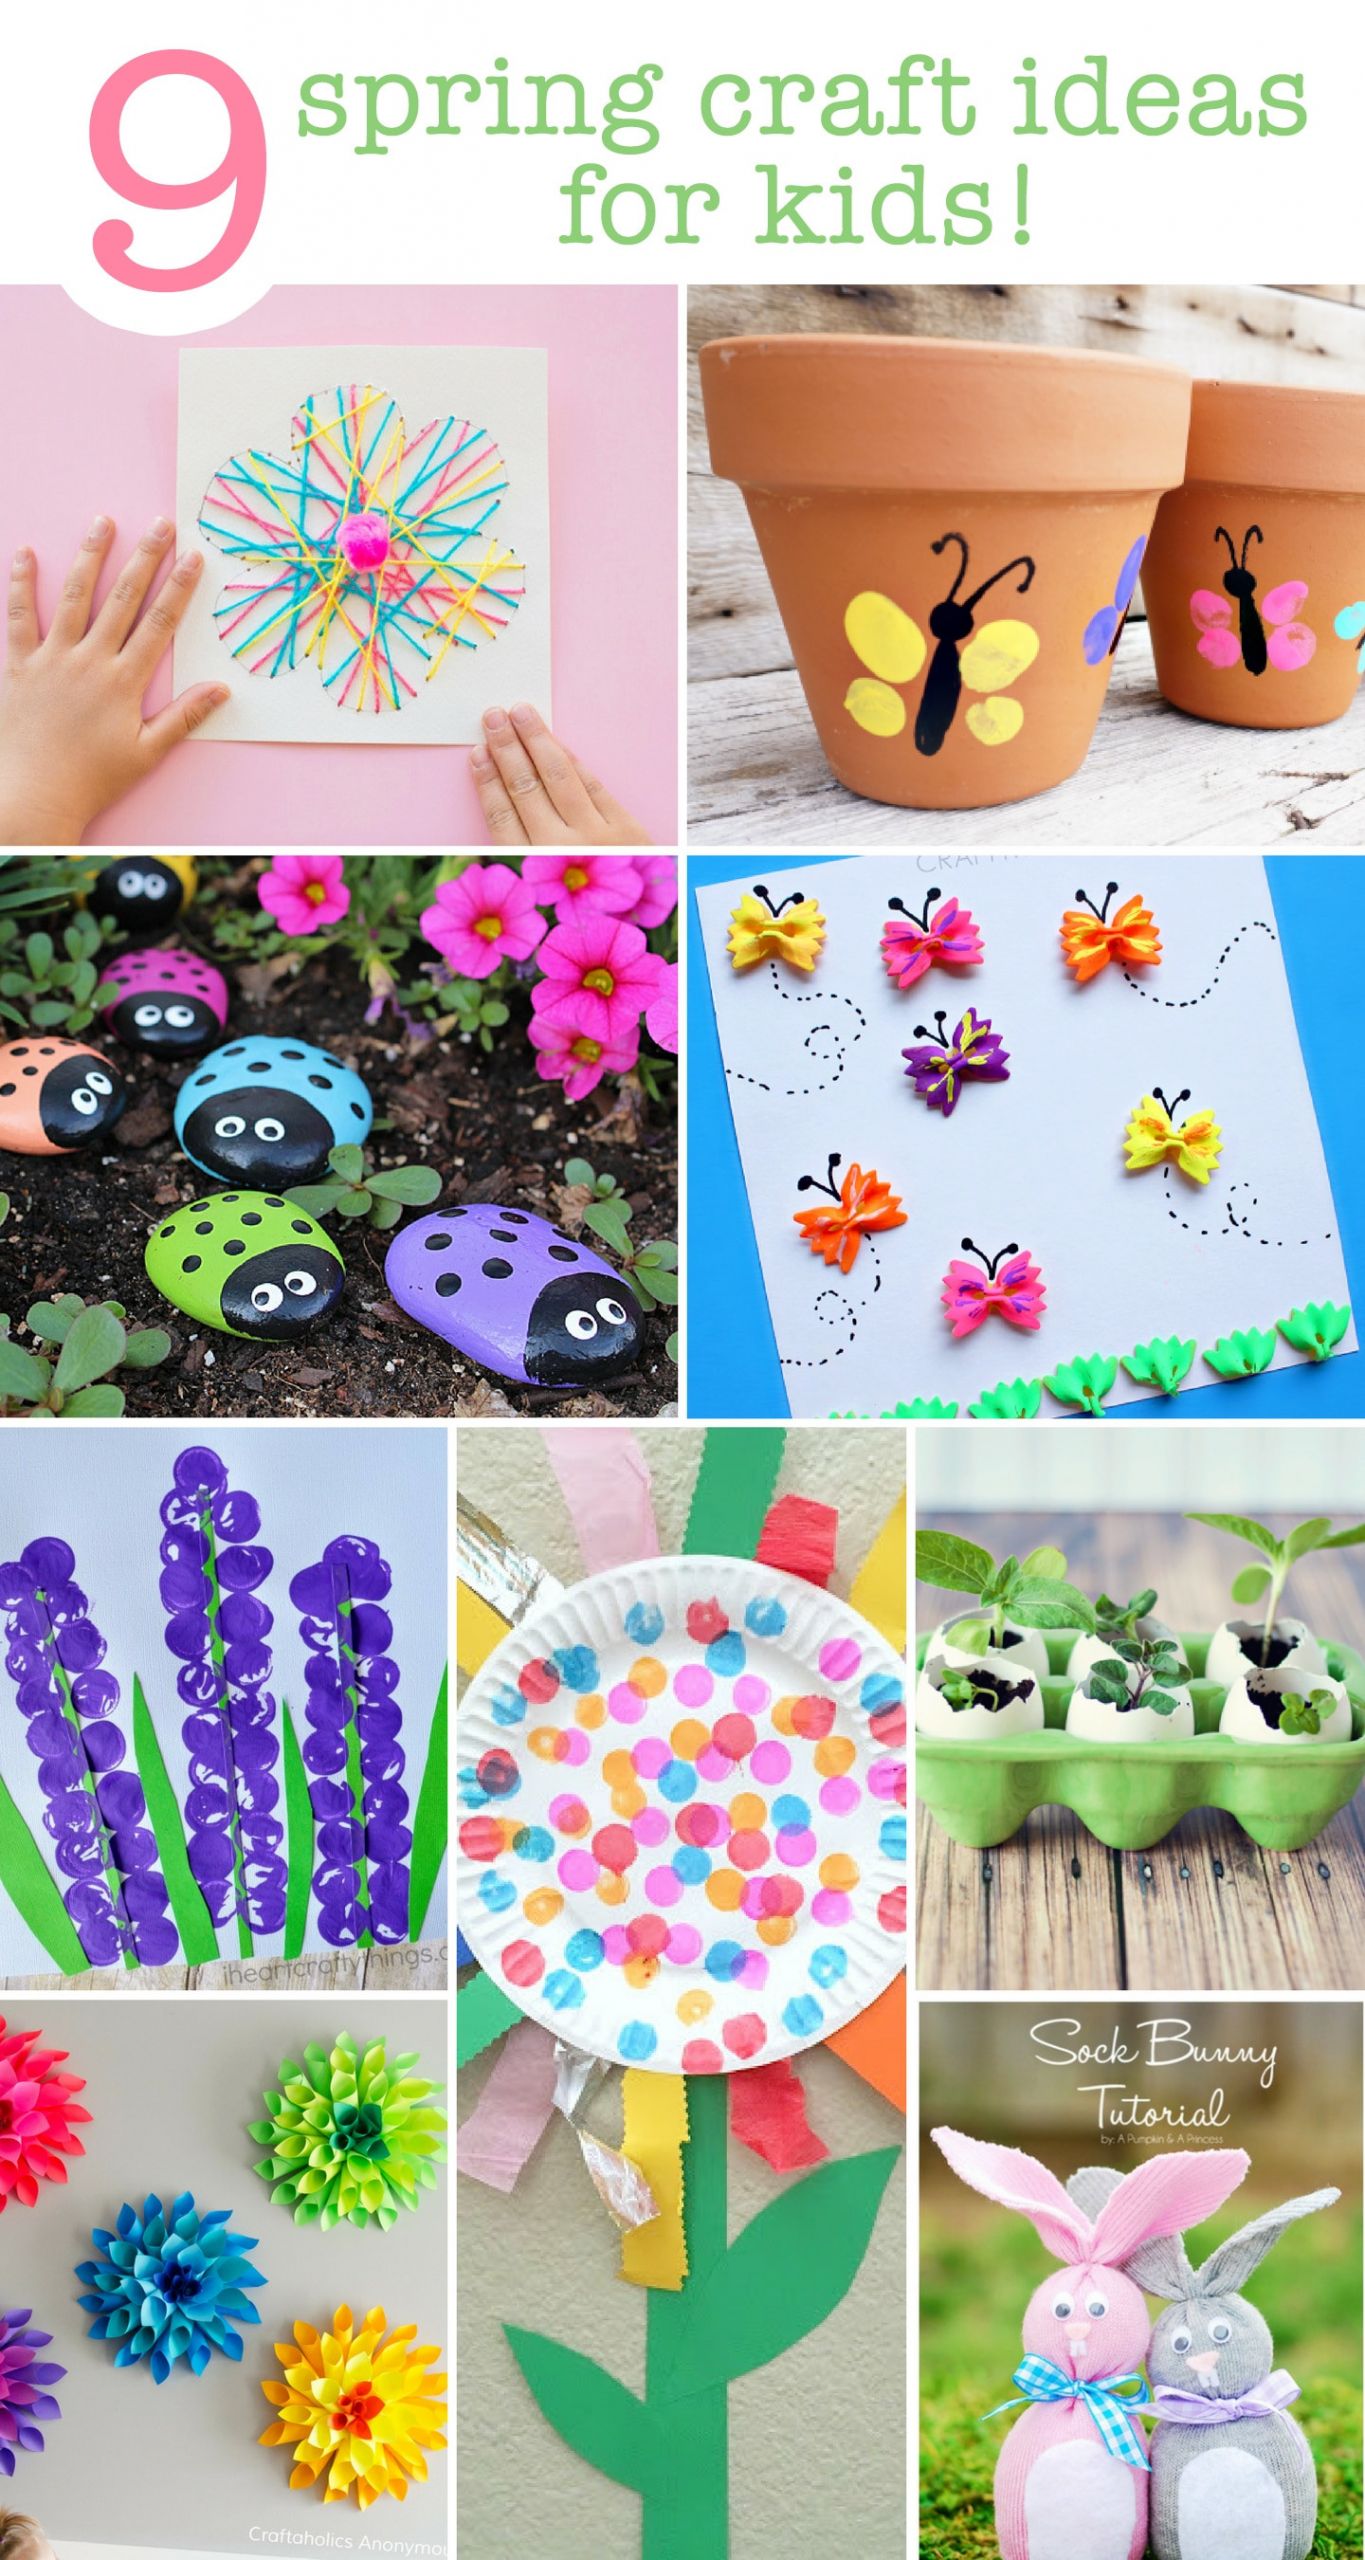 Spring Arts And Crafts For Toddlers
 9 Spring Craft Ideas For The Kids